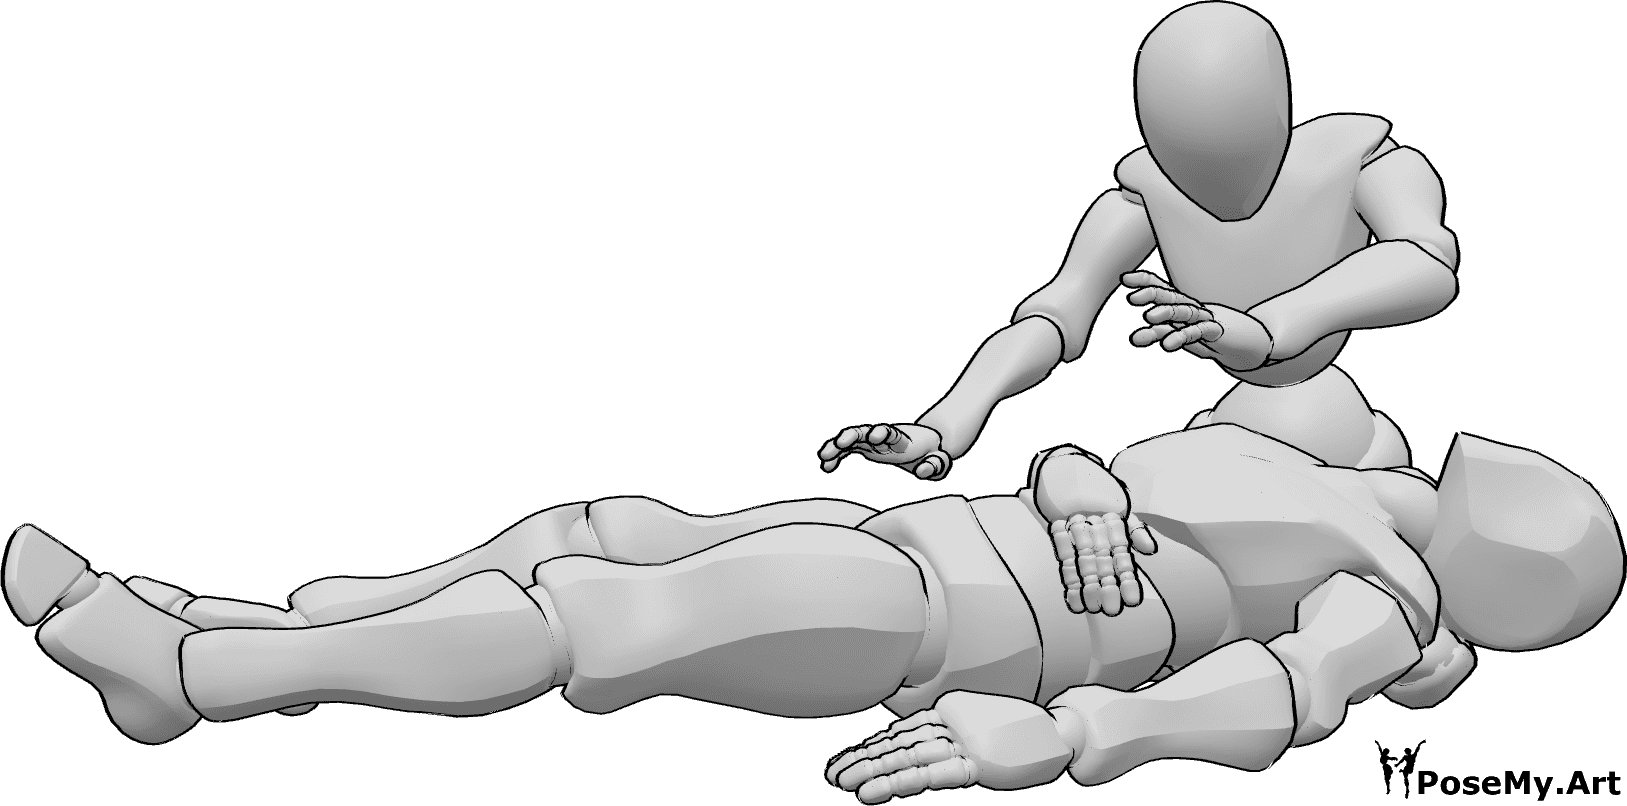 Pose Reference- Female healing male pose - Female healer is healing the male, who is lying injured on her lap